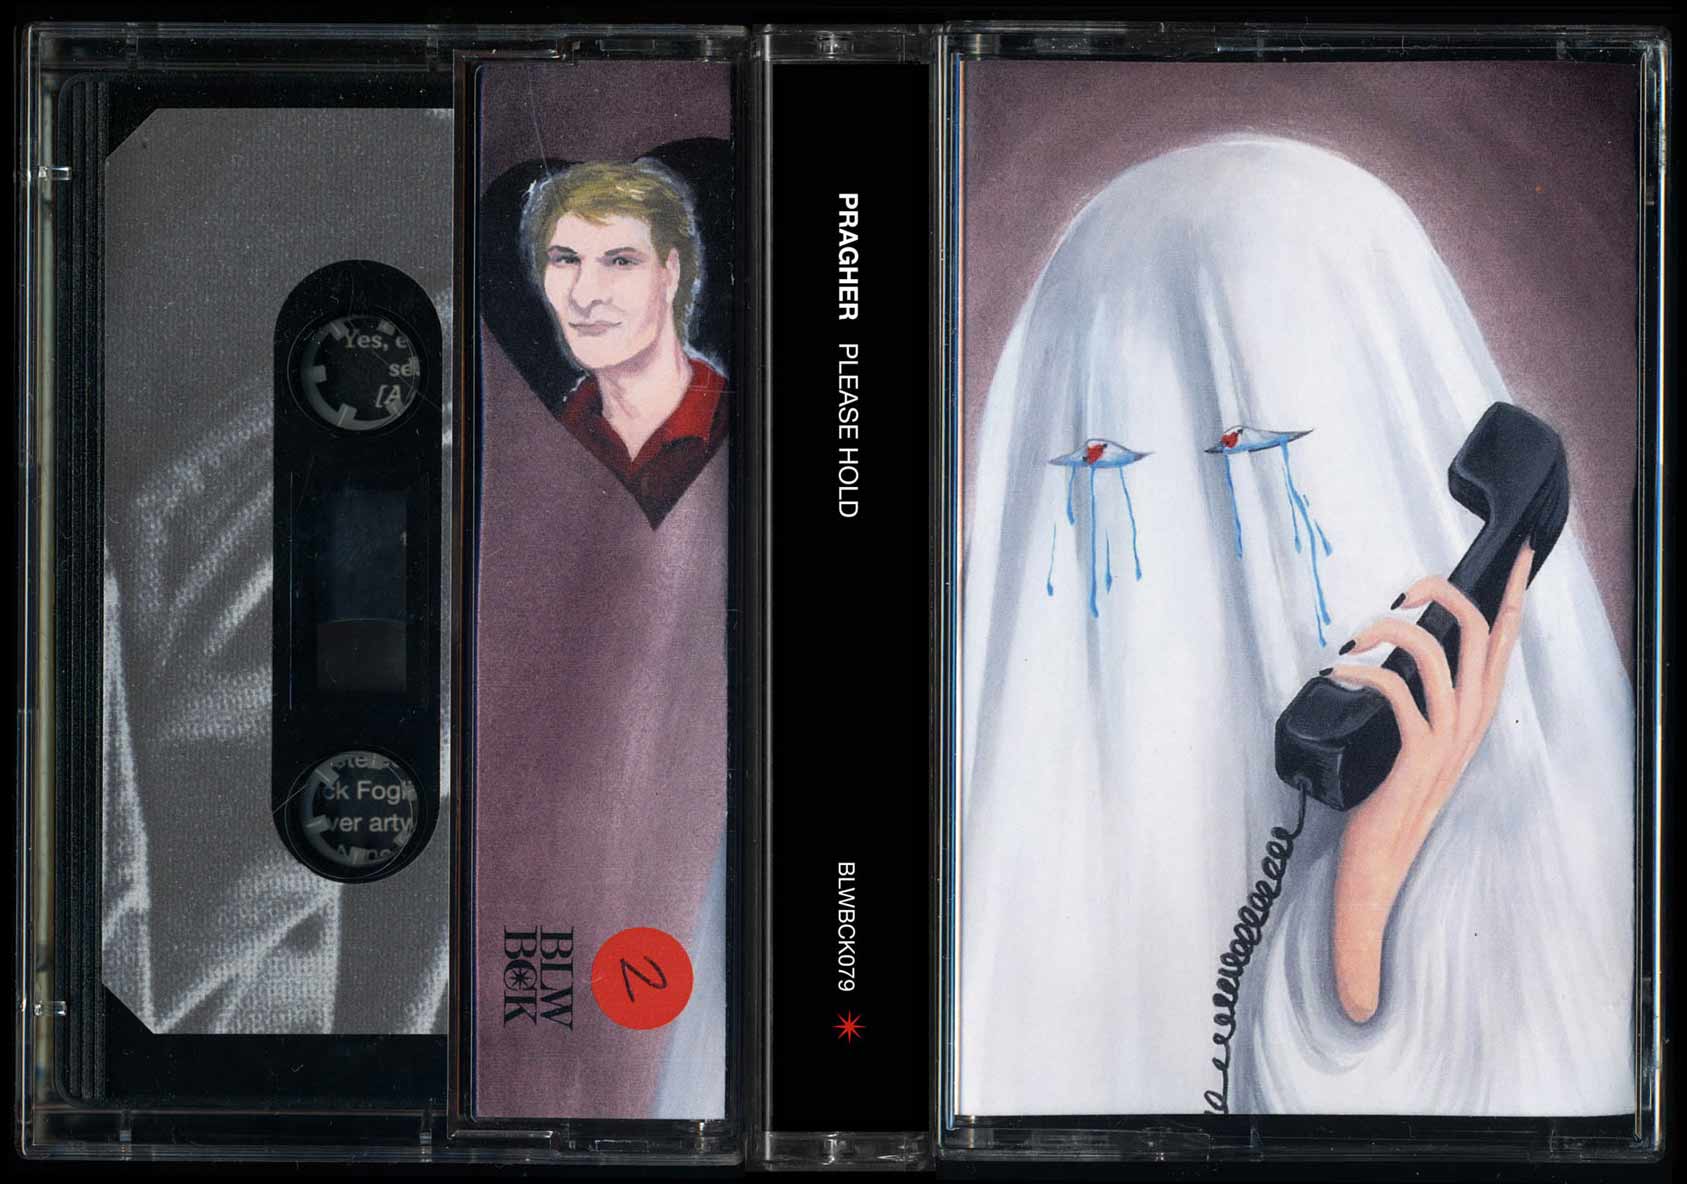 Pragher, Please Hold, Limited Cassette Edition